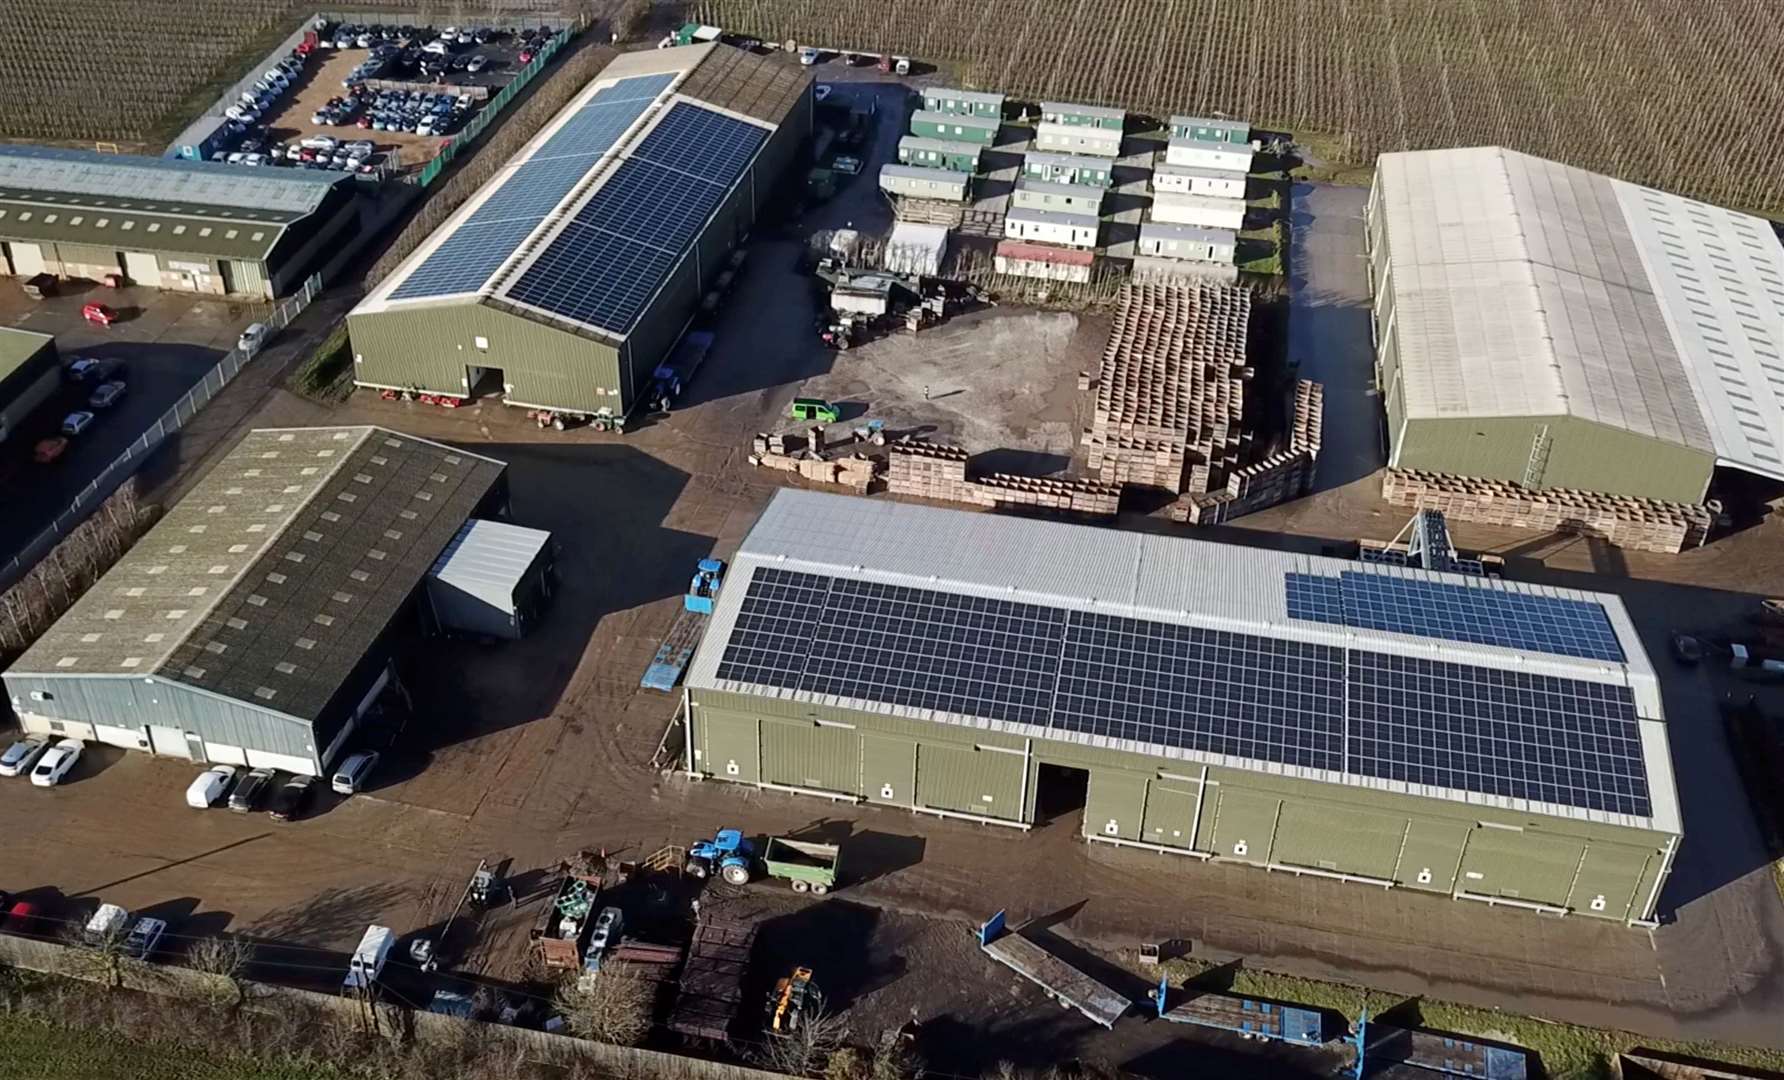 Many industrial buildings – such as Howt Green Farm in Bobbing near Sittingbourne - have installed solar panels on their roof